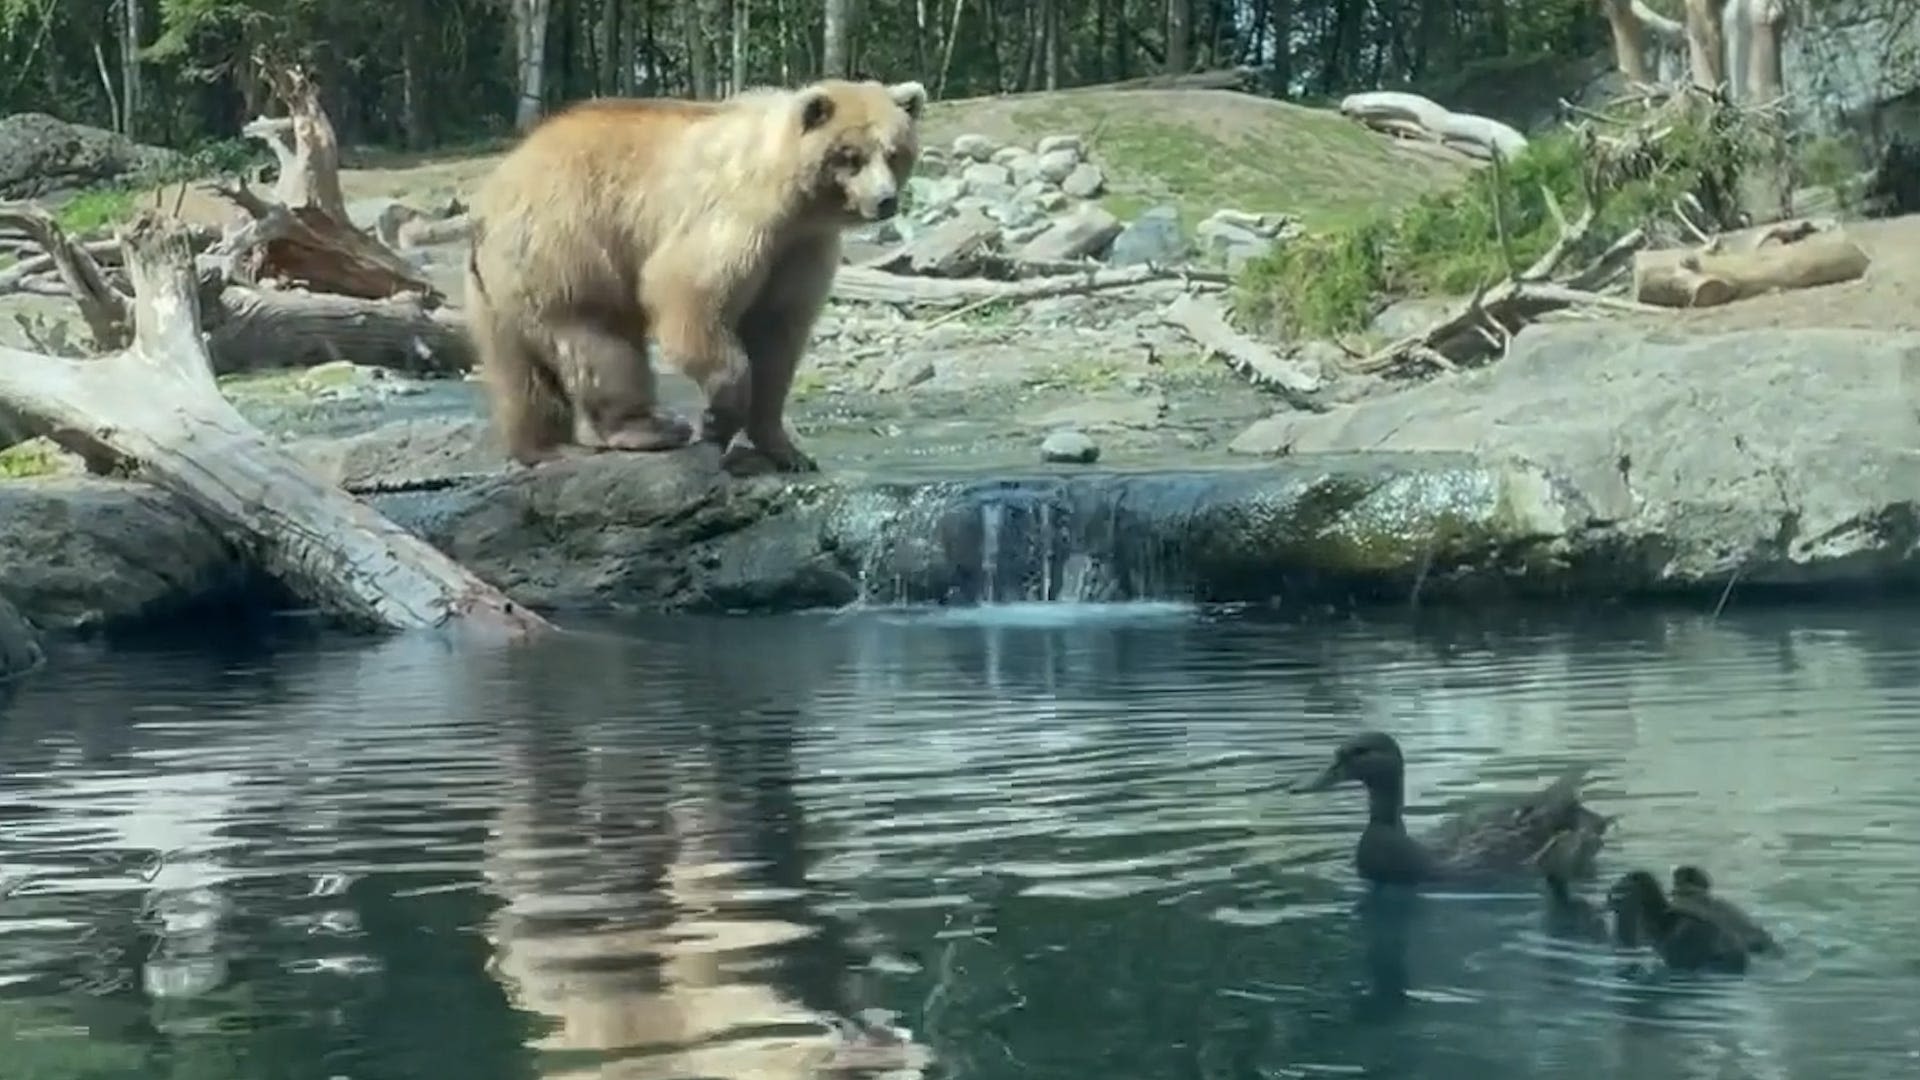 Bear eats family of ducks as children and parents watch in horror: See the video